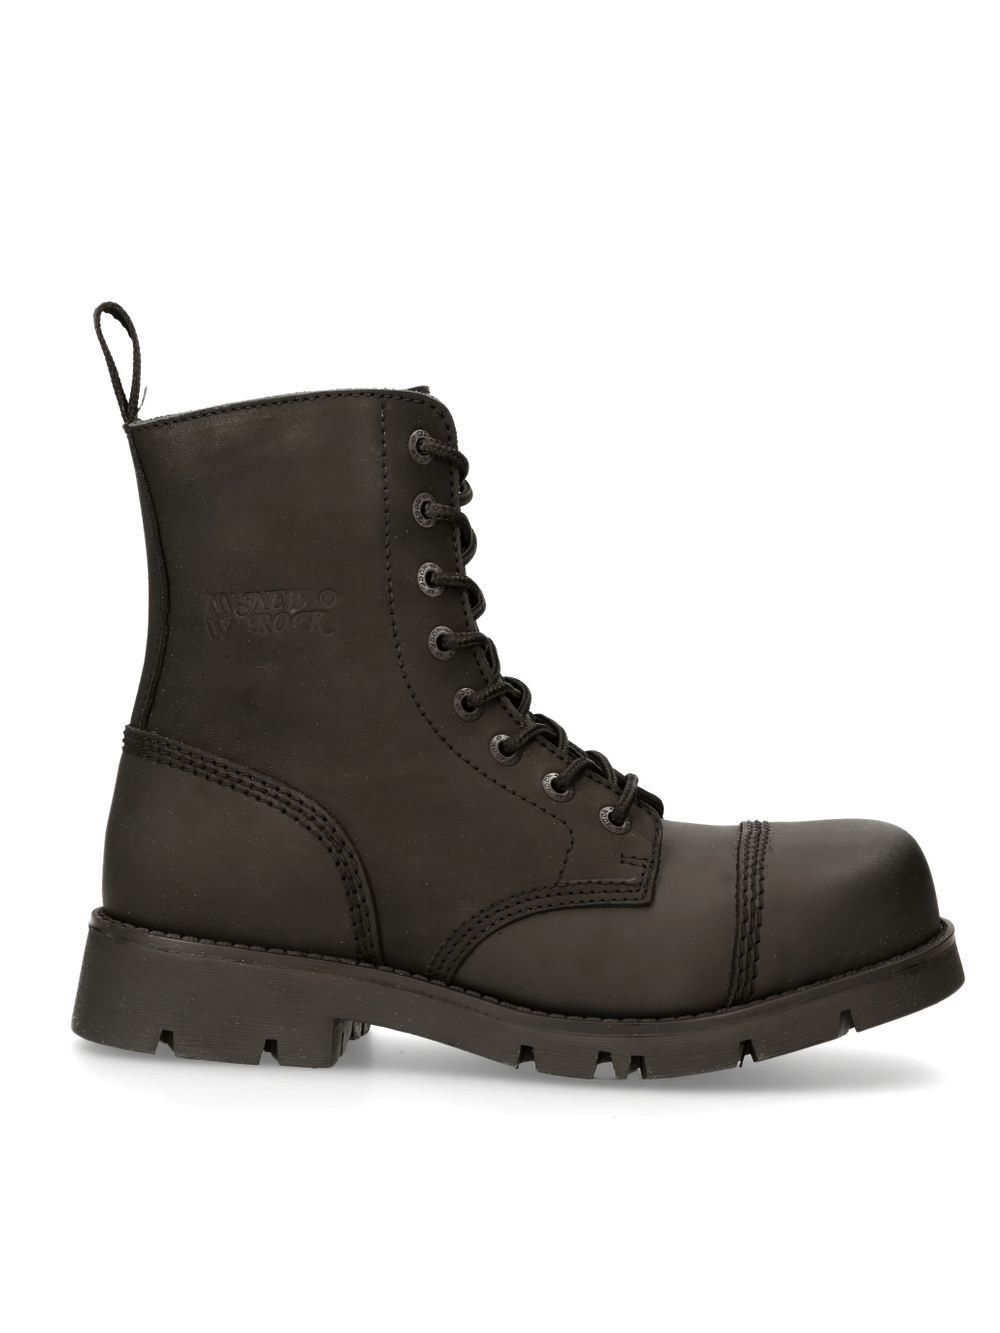 NEW ROCK Rugged Lace-Up Black Tactical Leather Boots